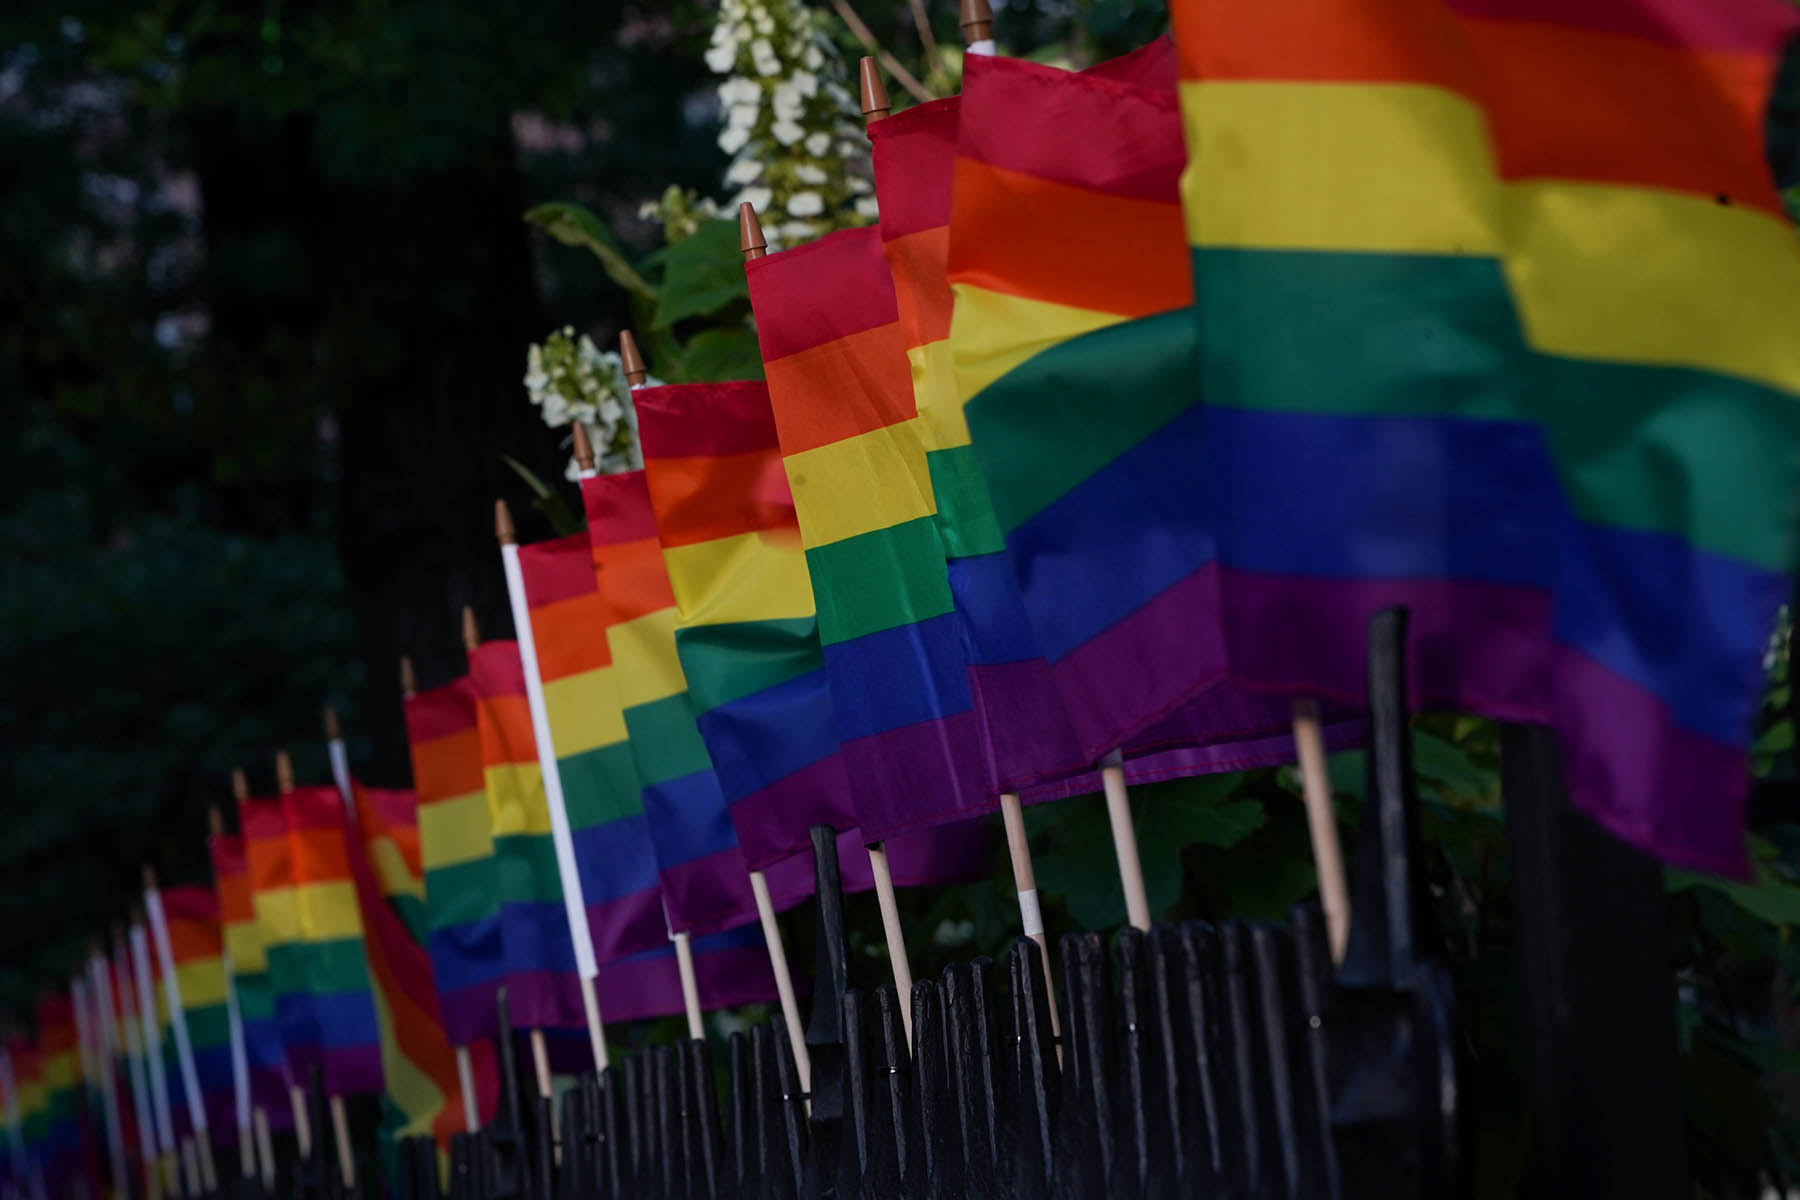 Rainbow flags fly across the street from the Stonewall Inn in New York